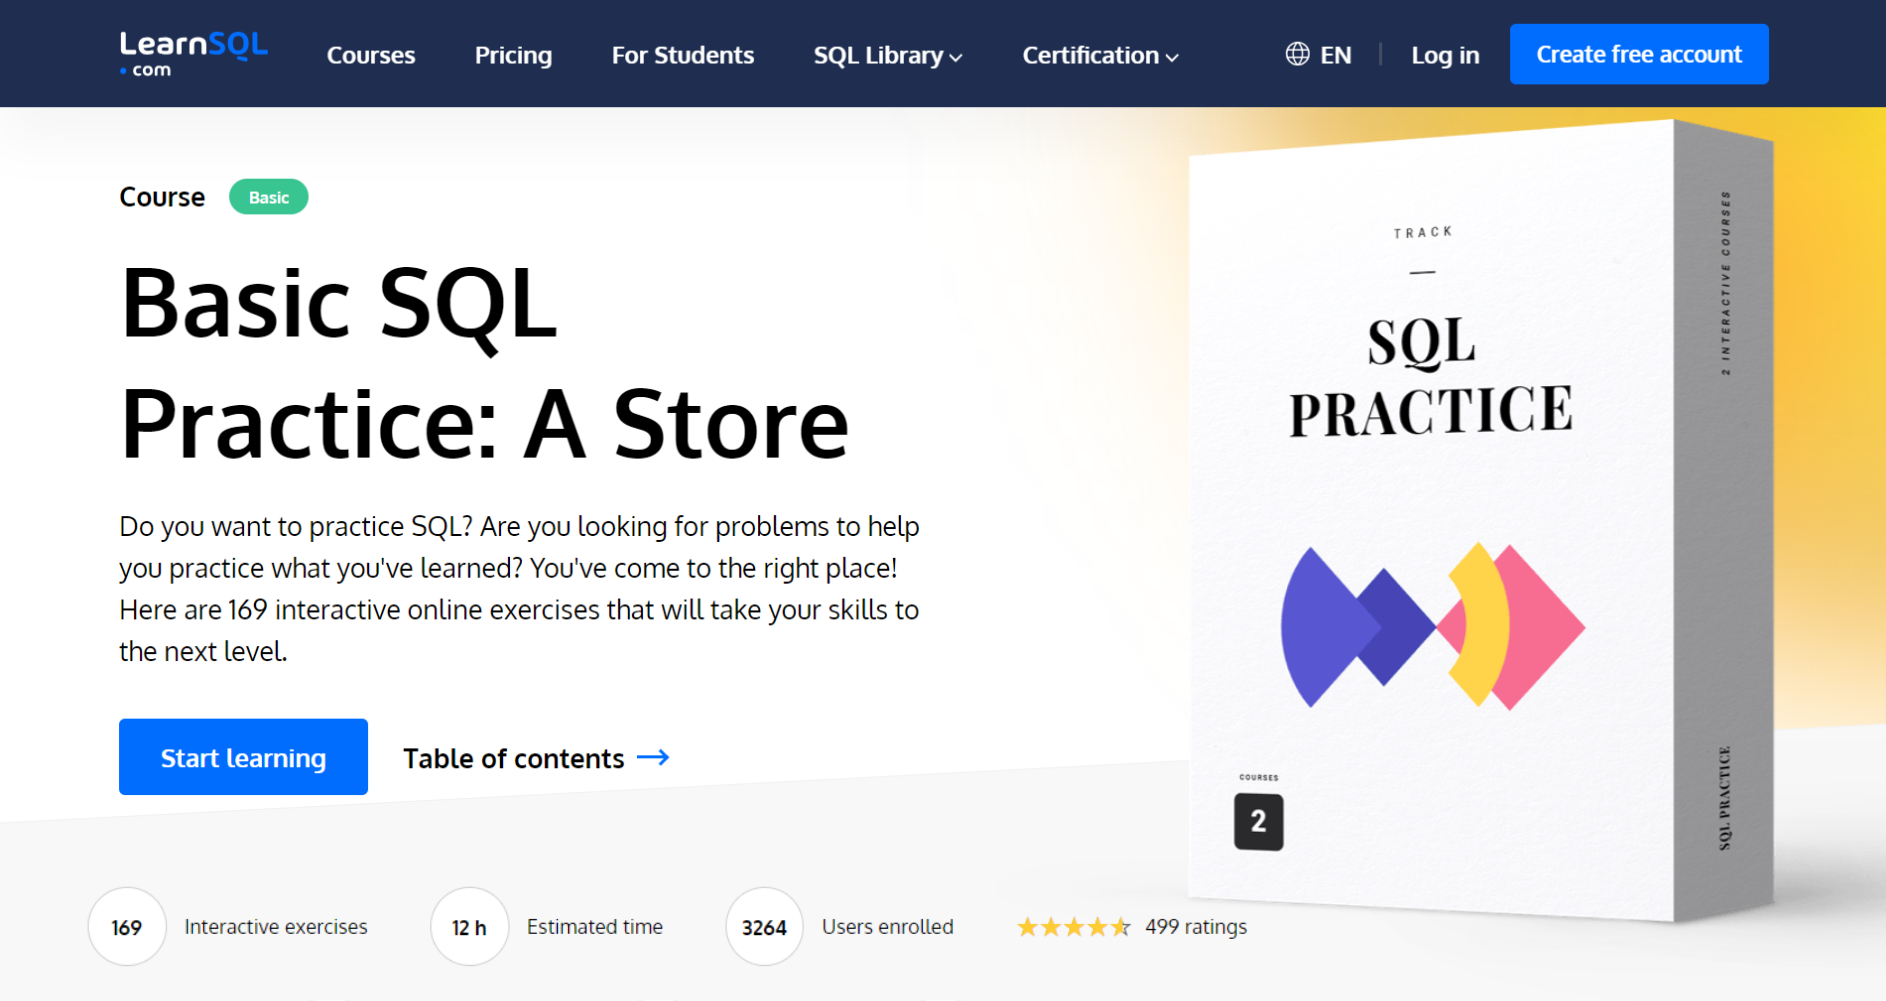 Free Course of the Month –  Basic SQL Practice: A Store